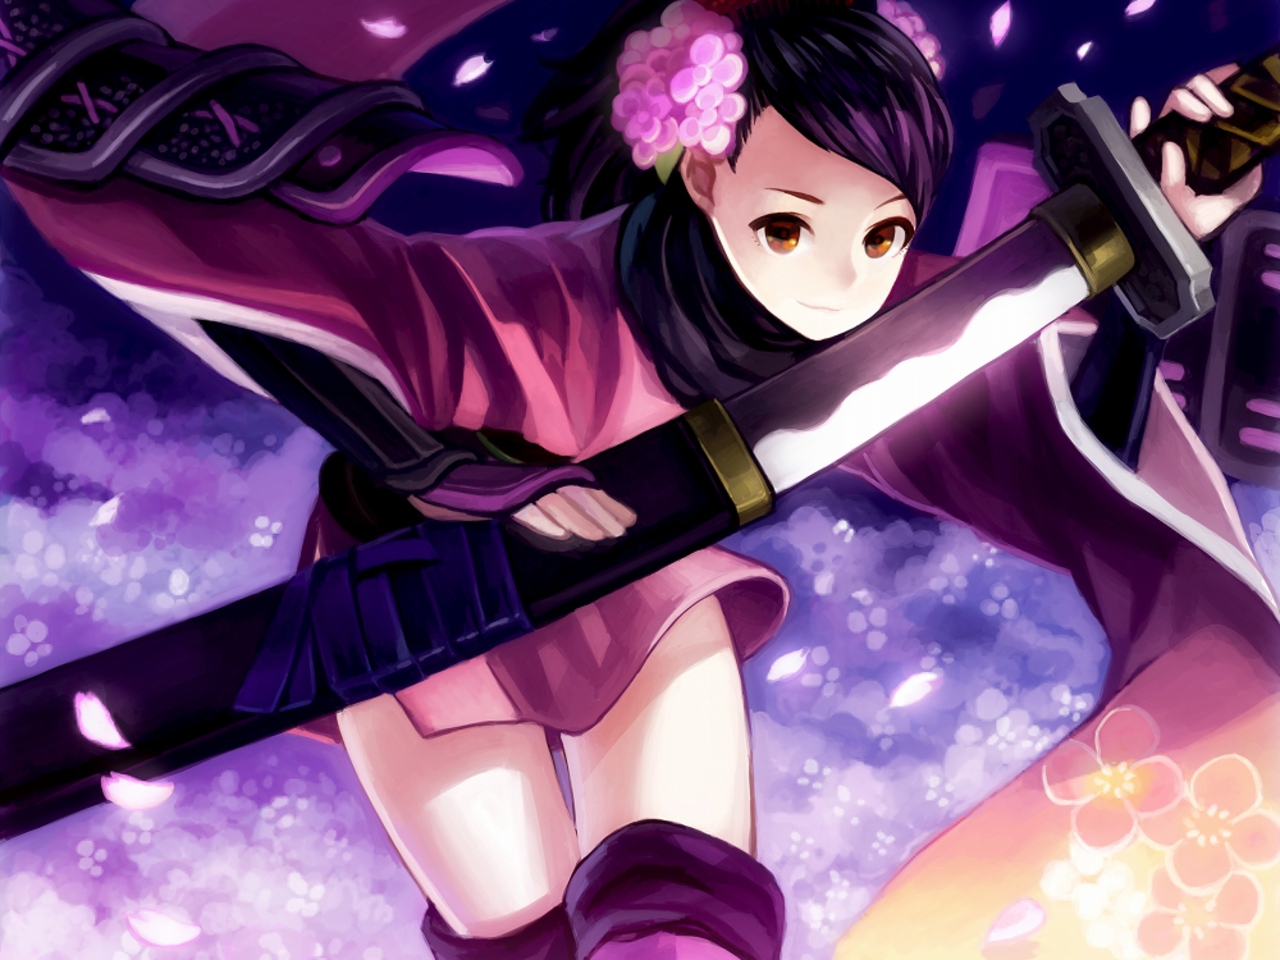 Related Searches For Anime Ninja Wallpaper